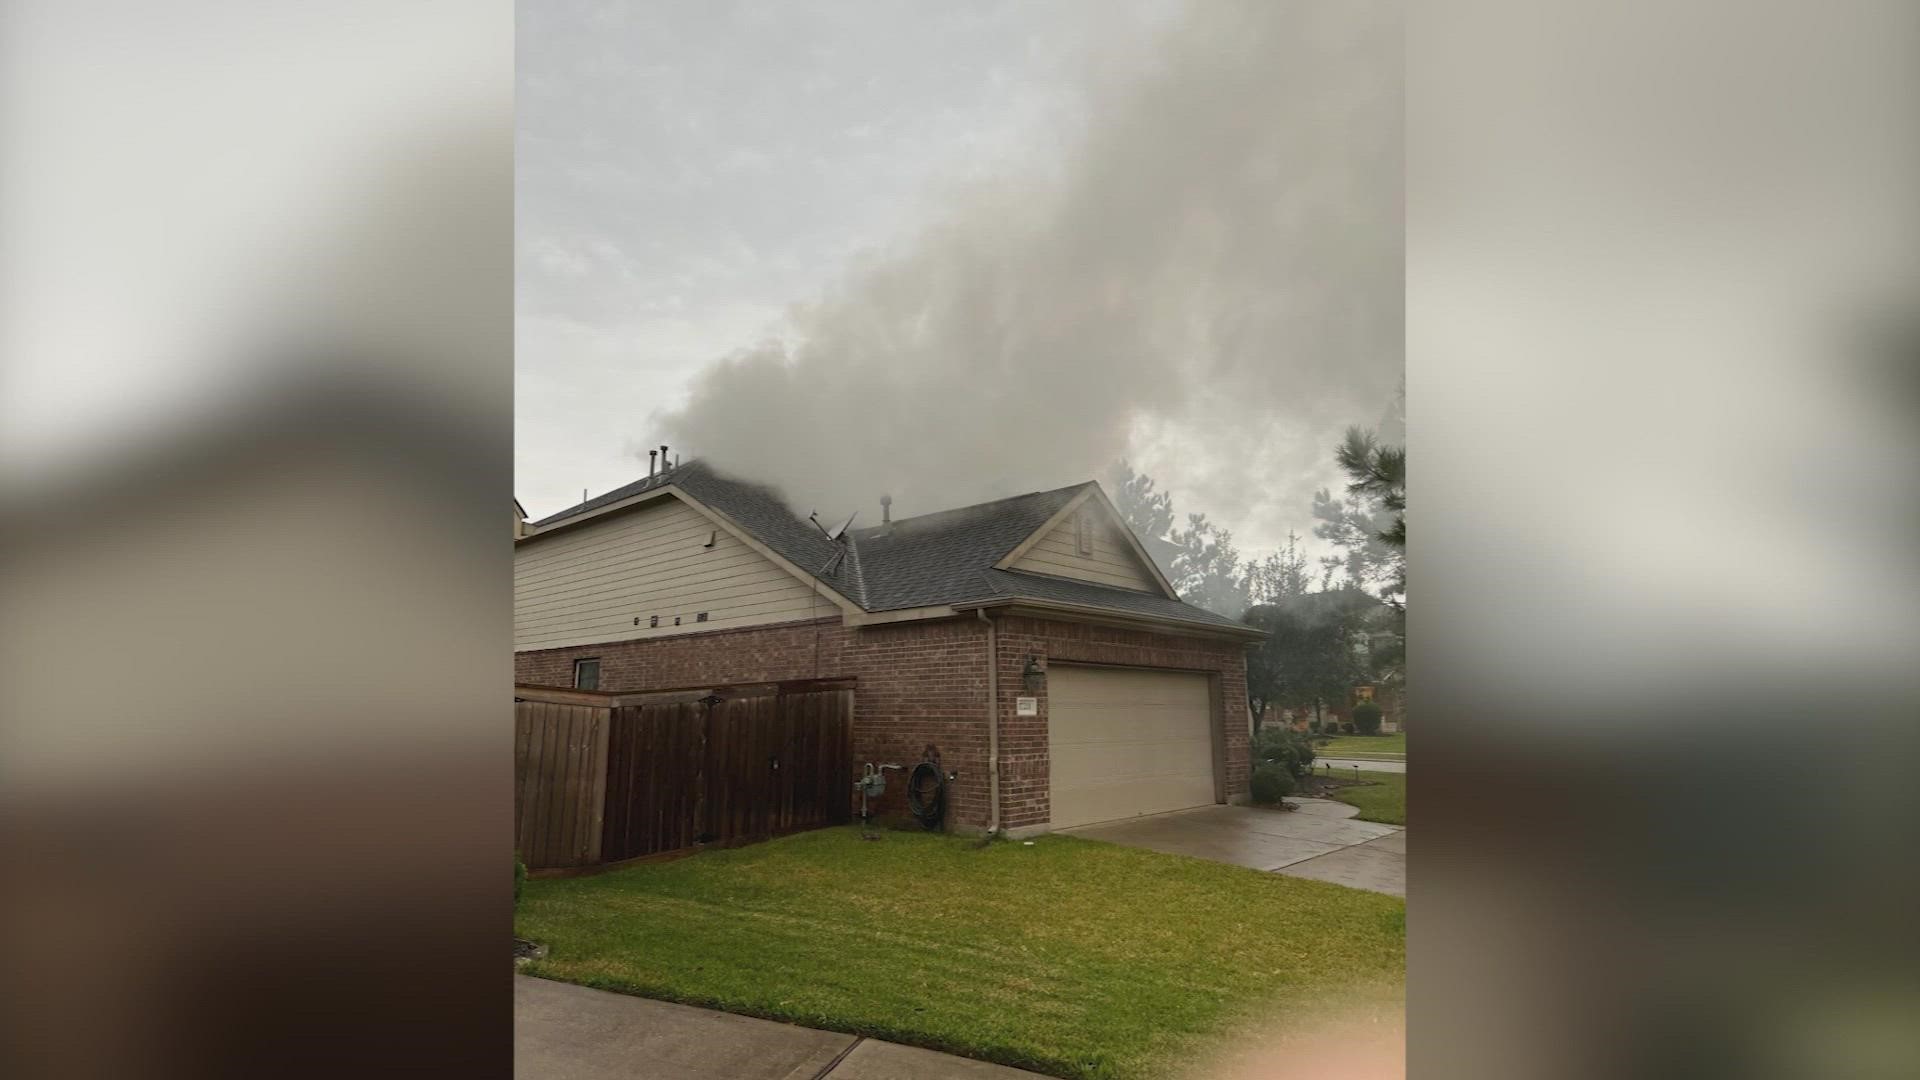 A lightning strike sparks a fire at a family's home in the Atascocita area.